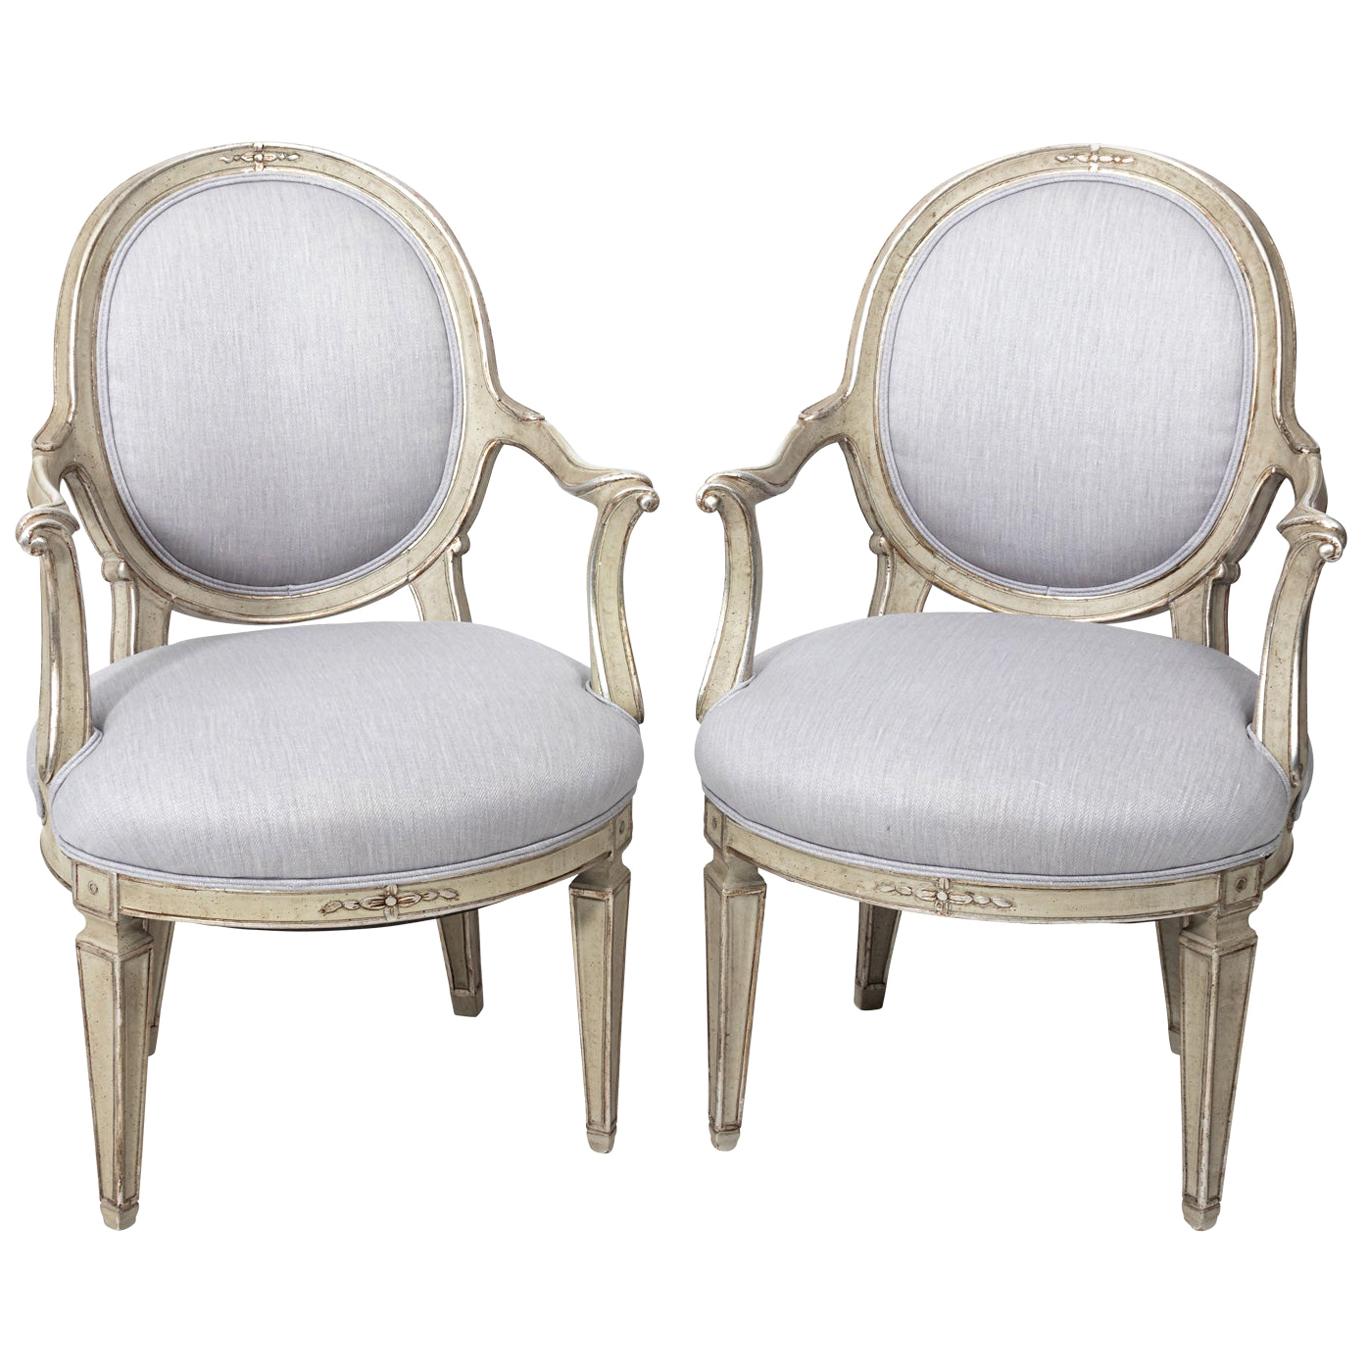 Pair of Louis XVI Style Silver Gilt Oval Back Fauteuil Armchairs